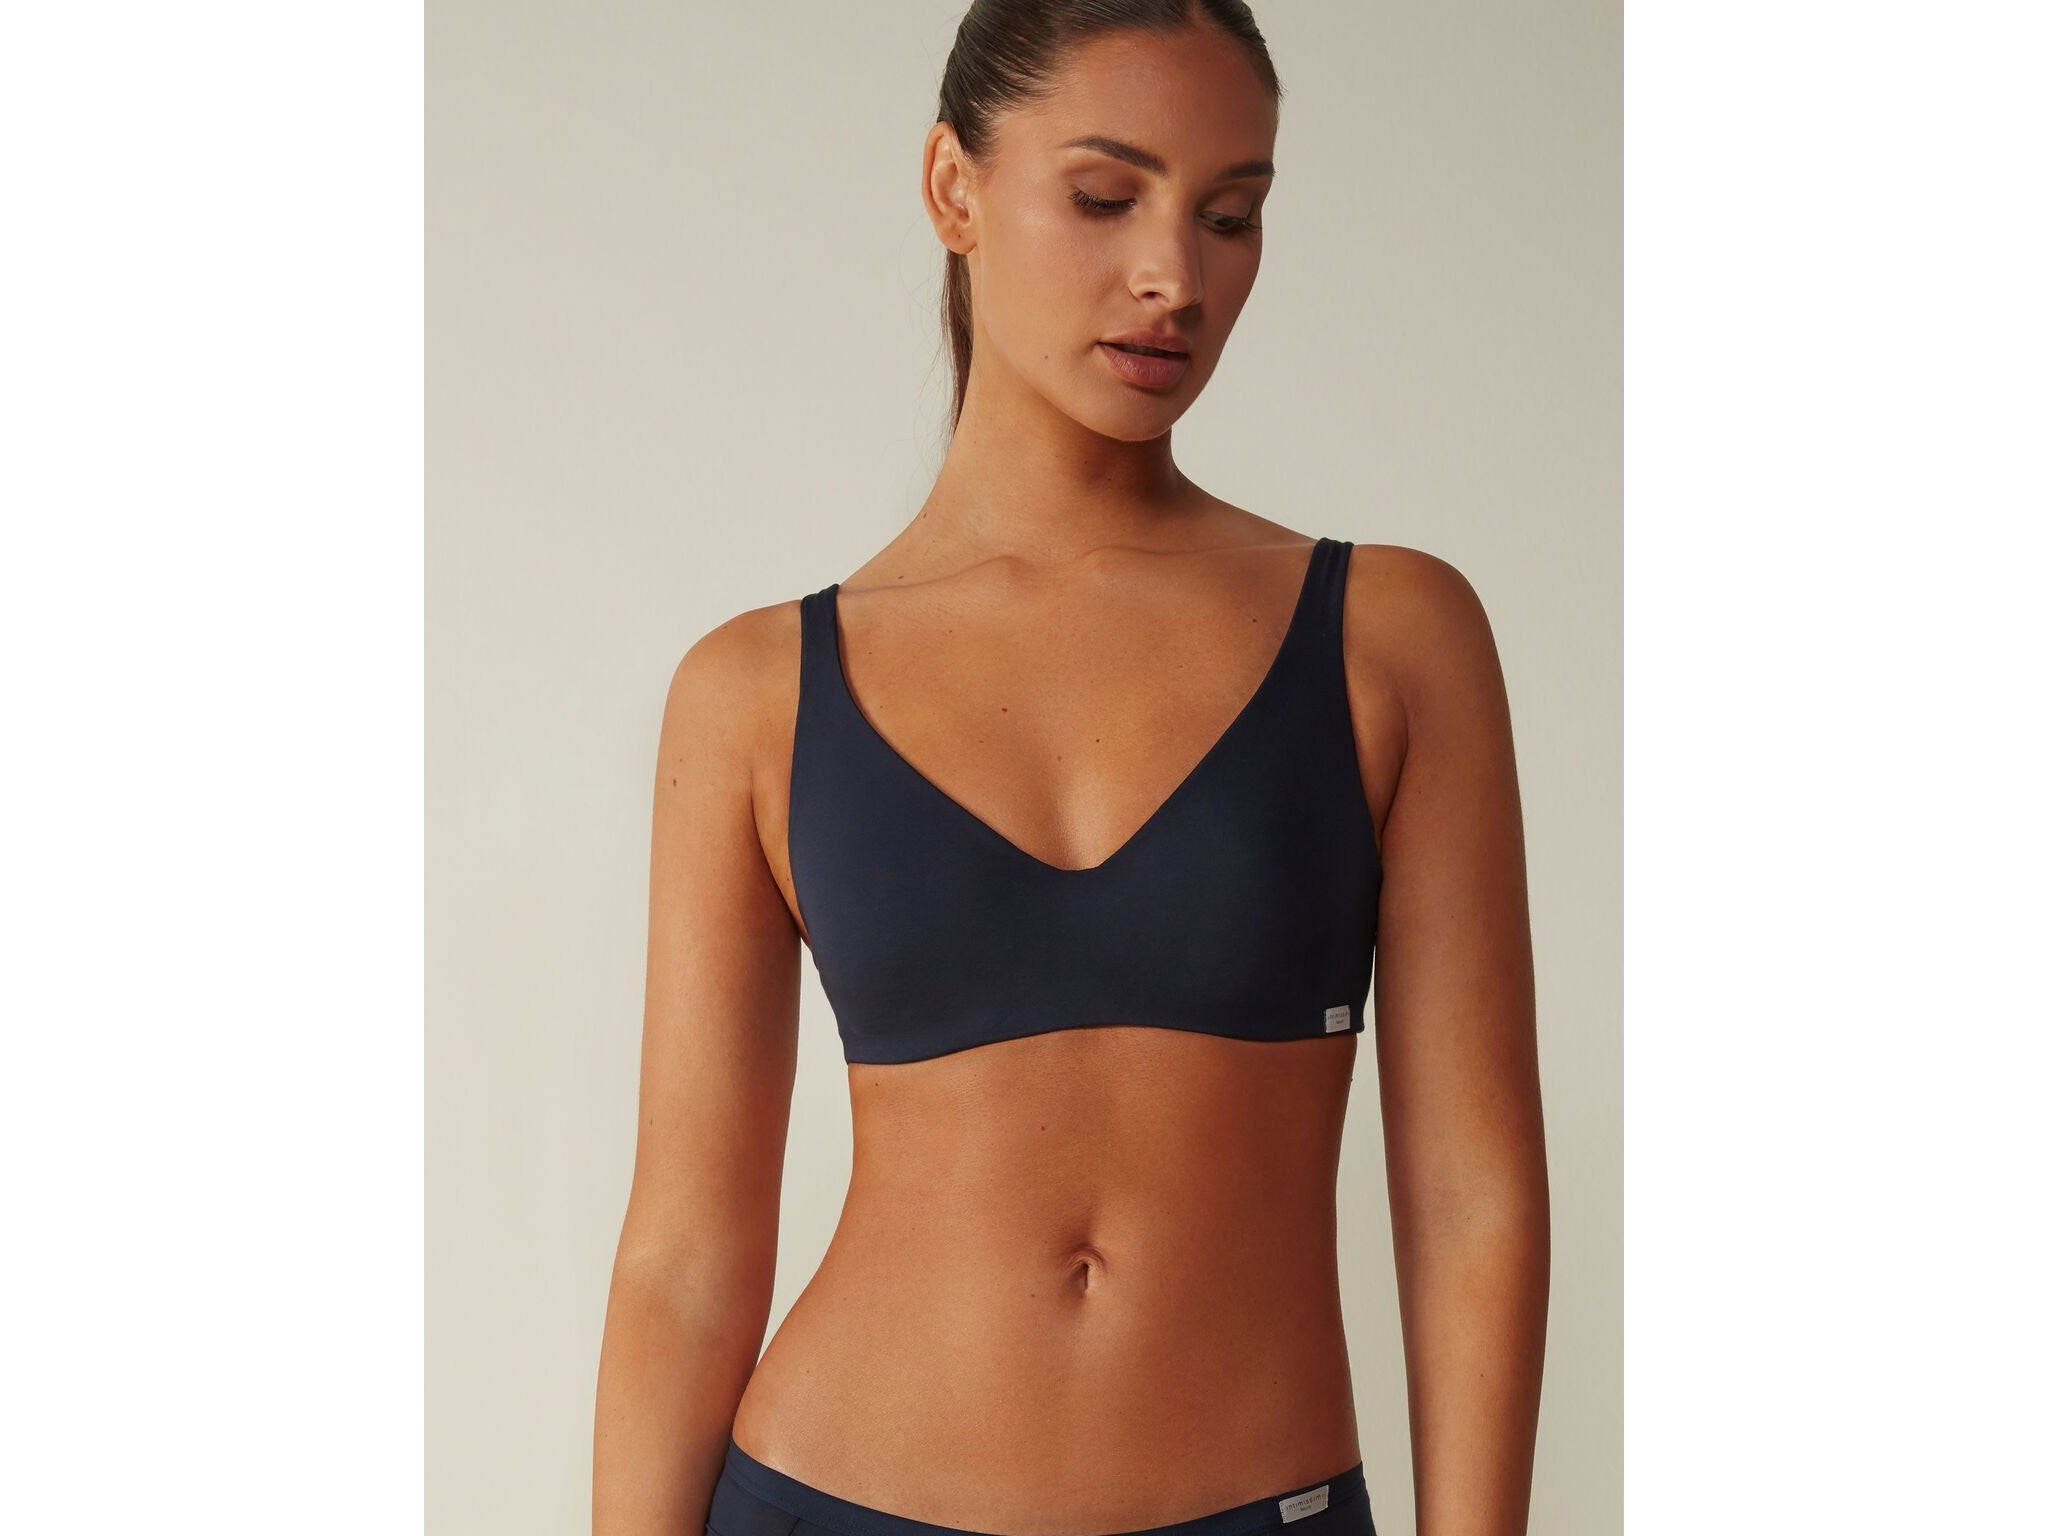 Definition of a good bra - supportive, comfortable and beautiful